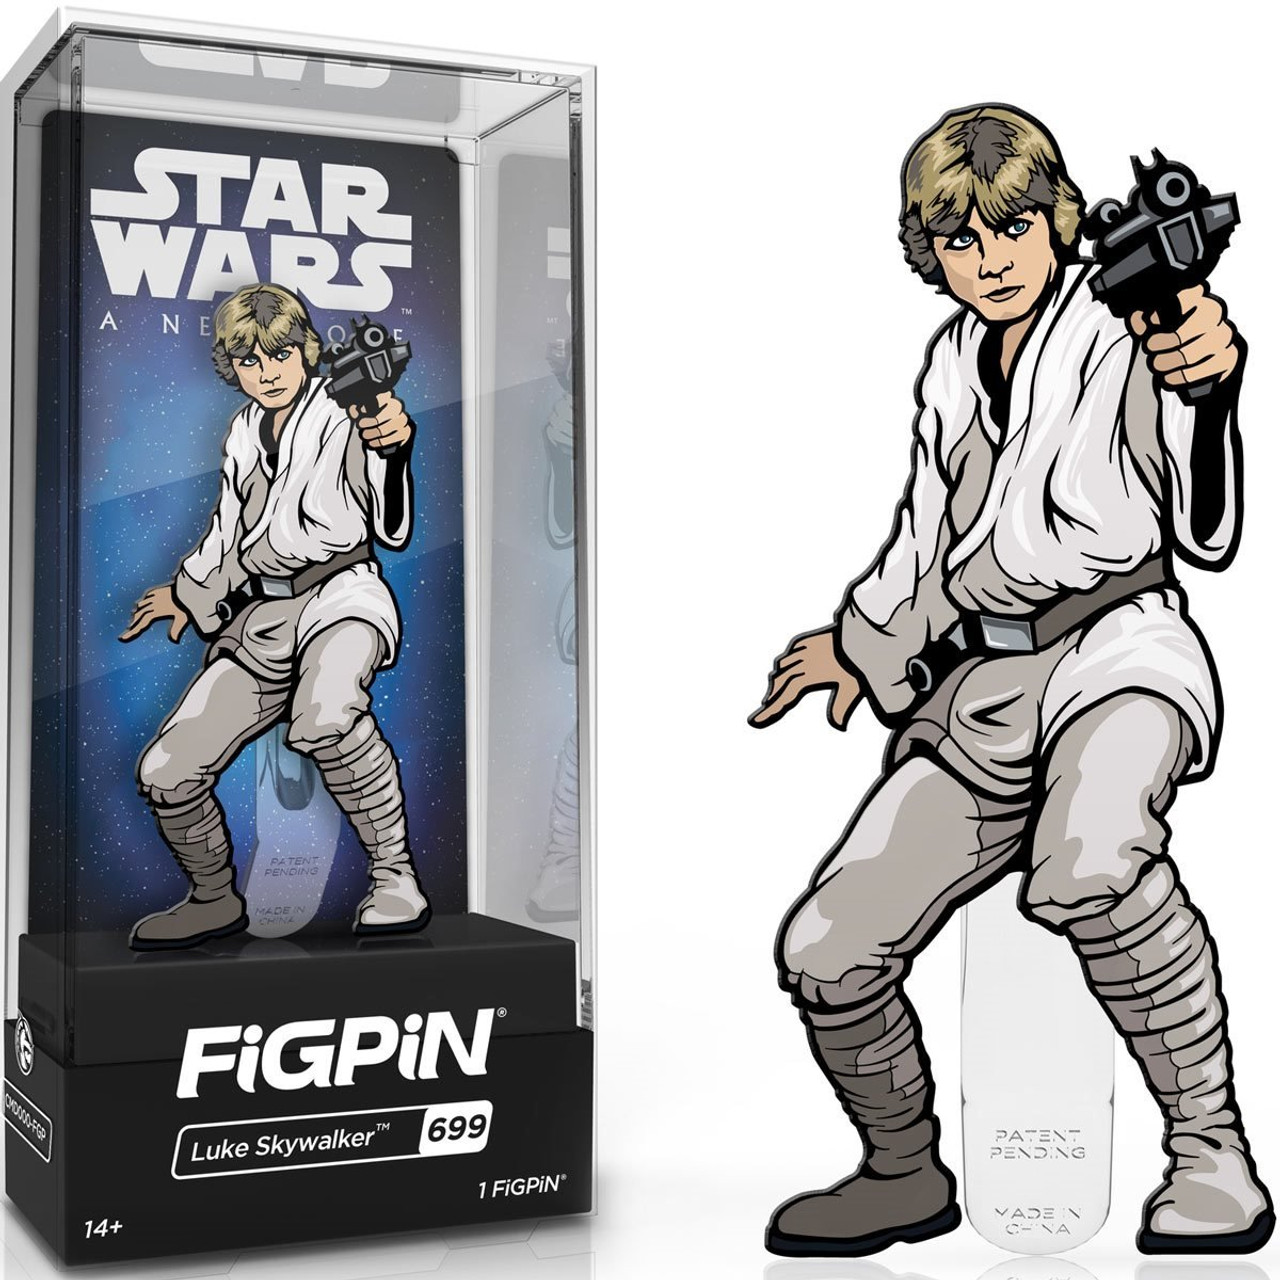 Pin on Figures, Toys, Action figures